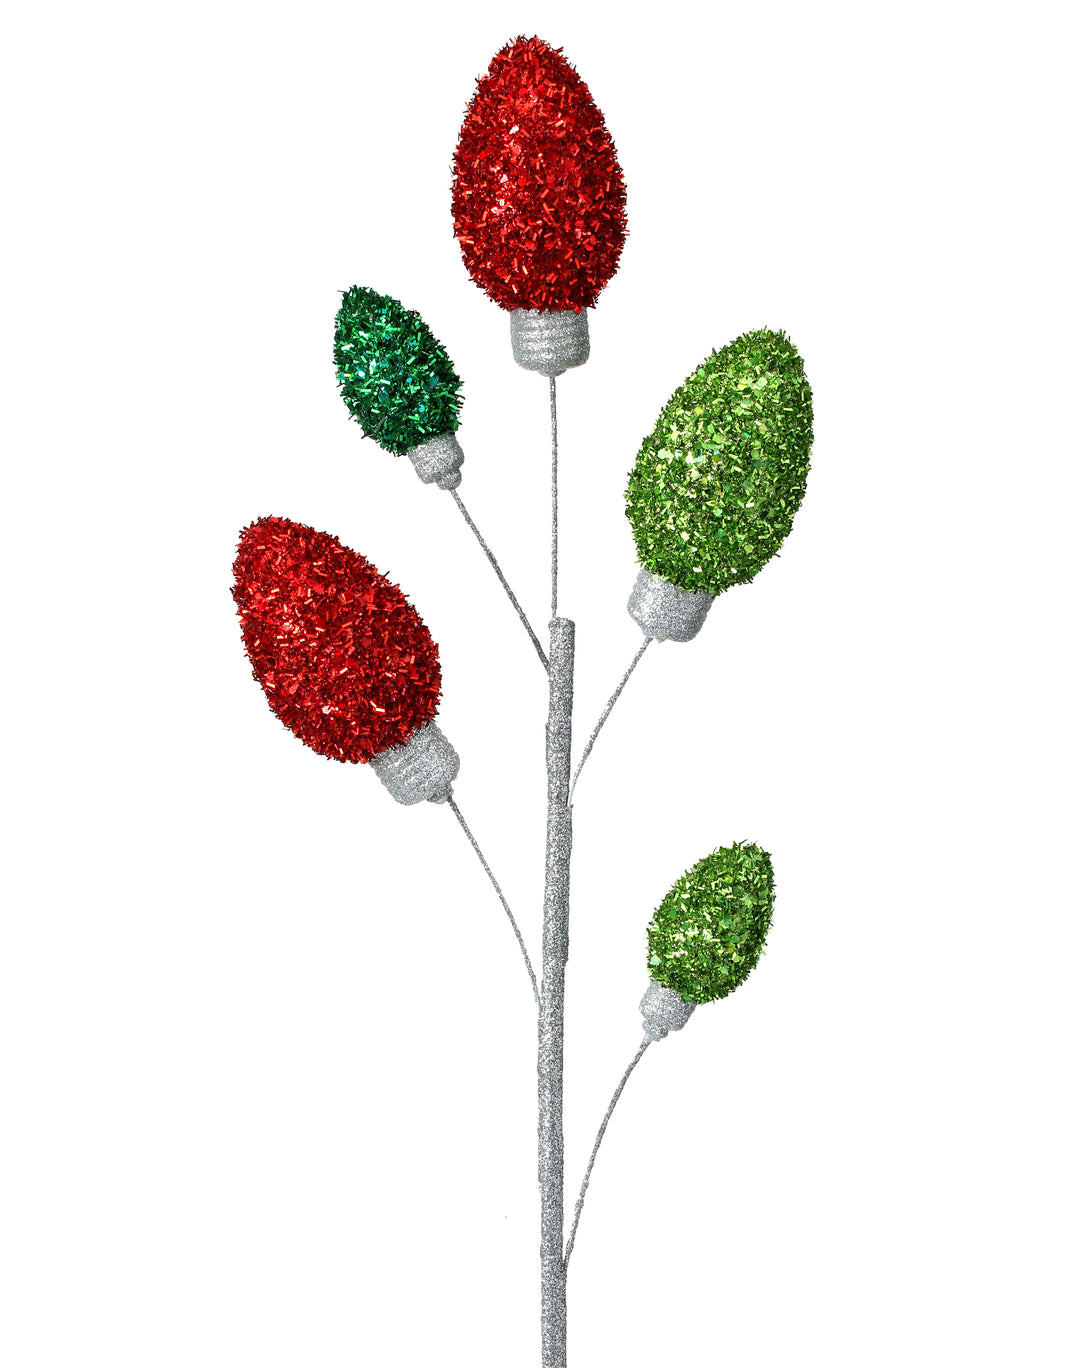 Regency 28" Tinsel Christmas Bulb Spray in Red and Green